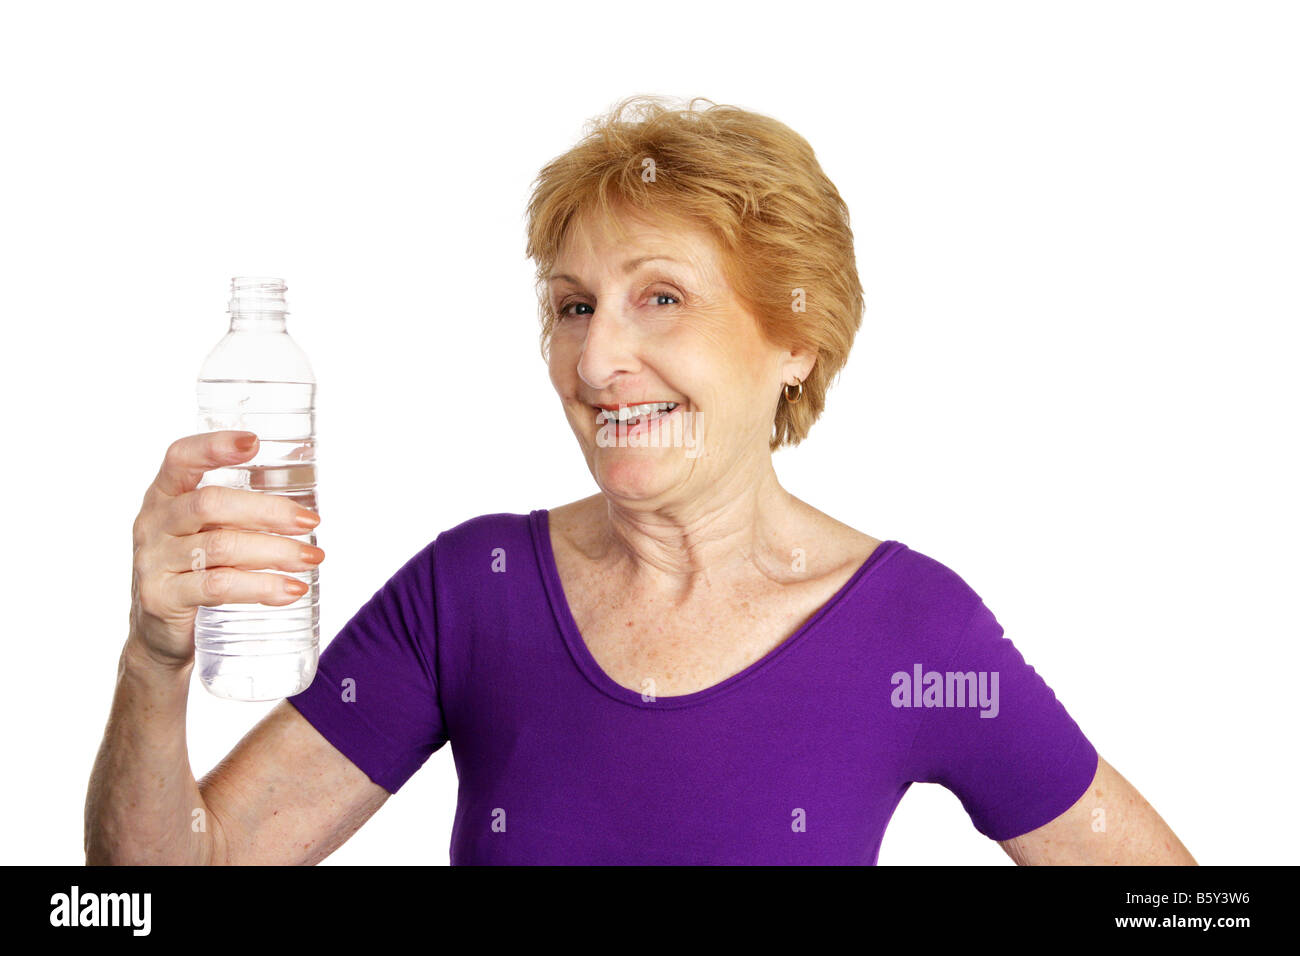 https://c8.alamy.com/comp/B5Y3W6/fit-senior-lady-in-a-leotard-about-to-drink-a-bottle-of-water-isolated-B5Y3W6.jpg